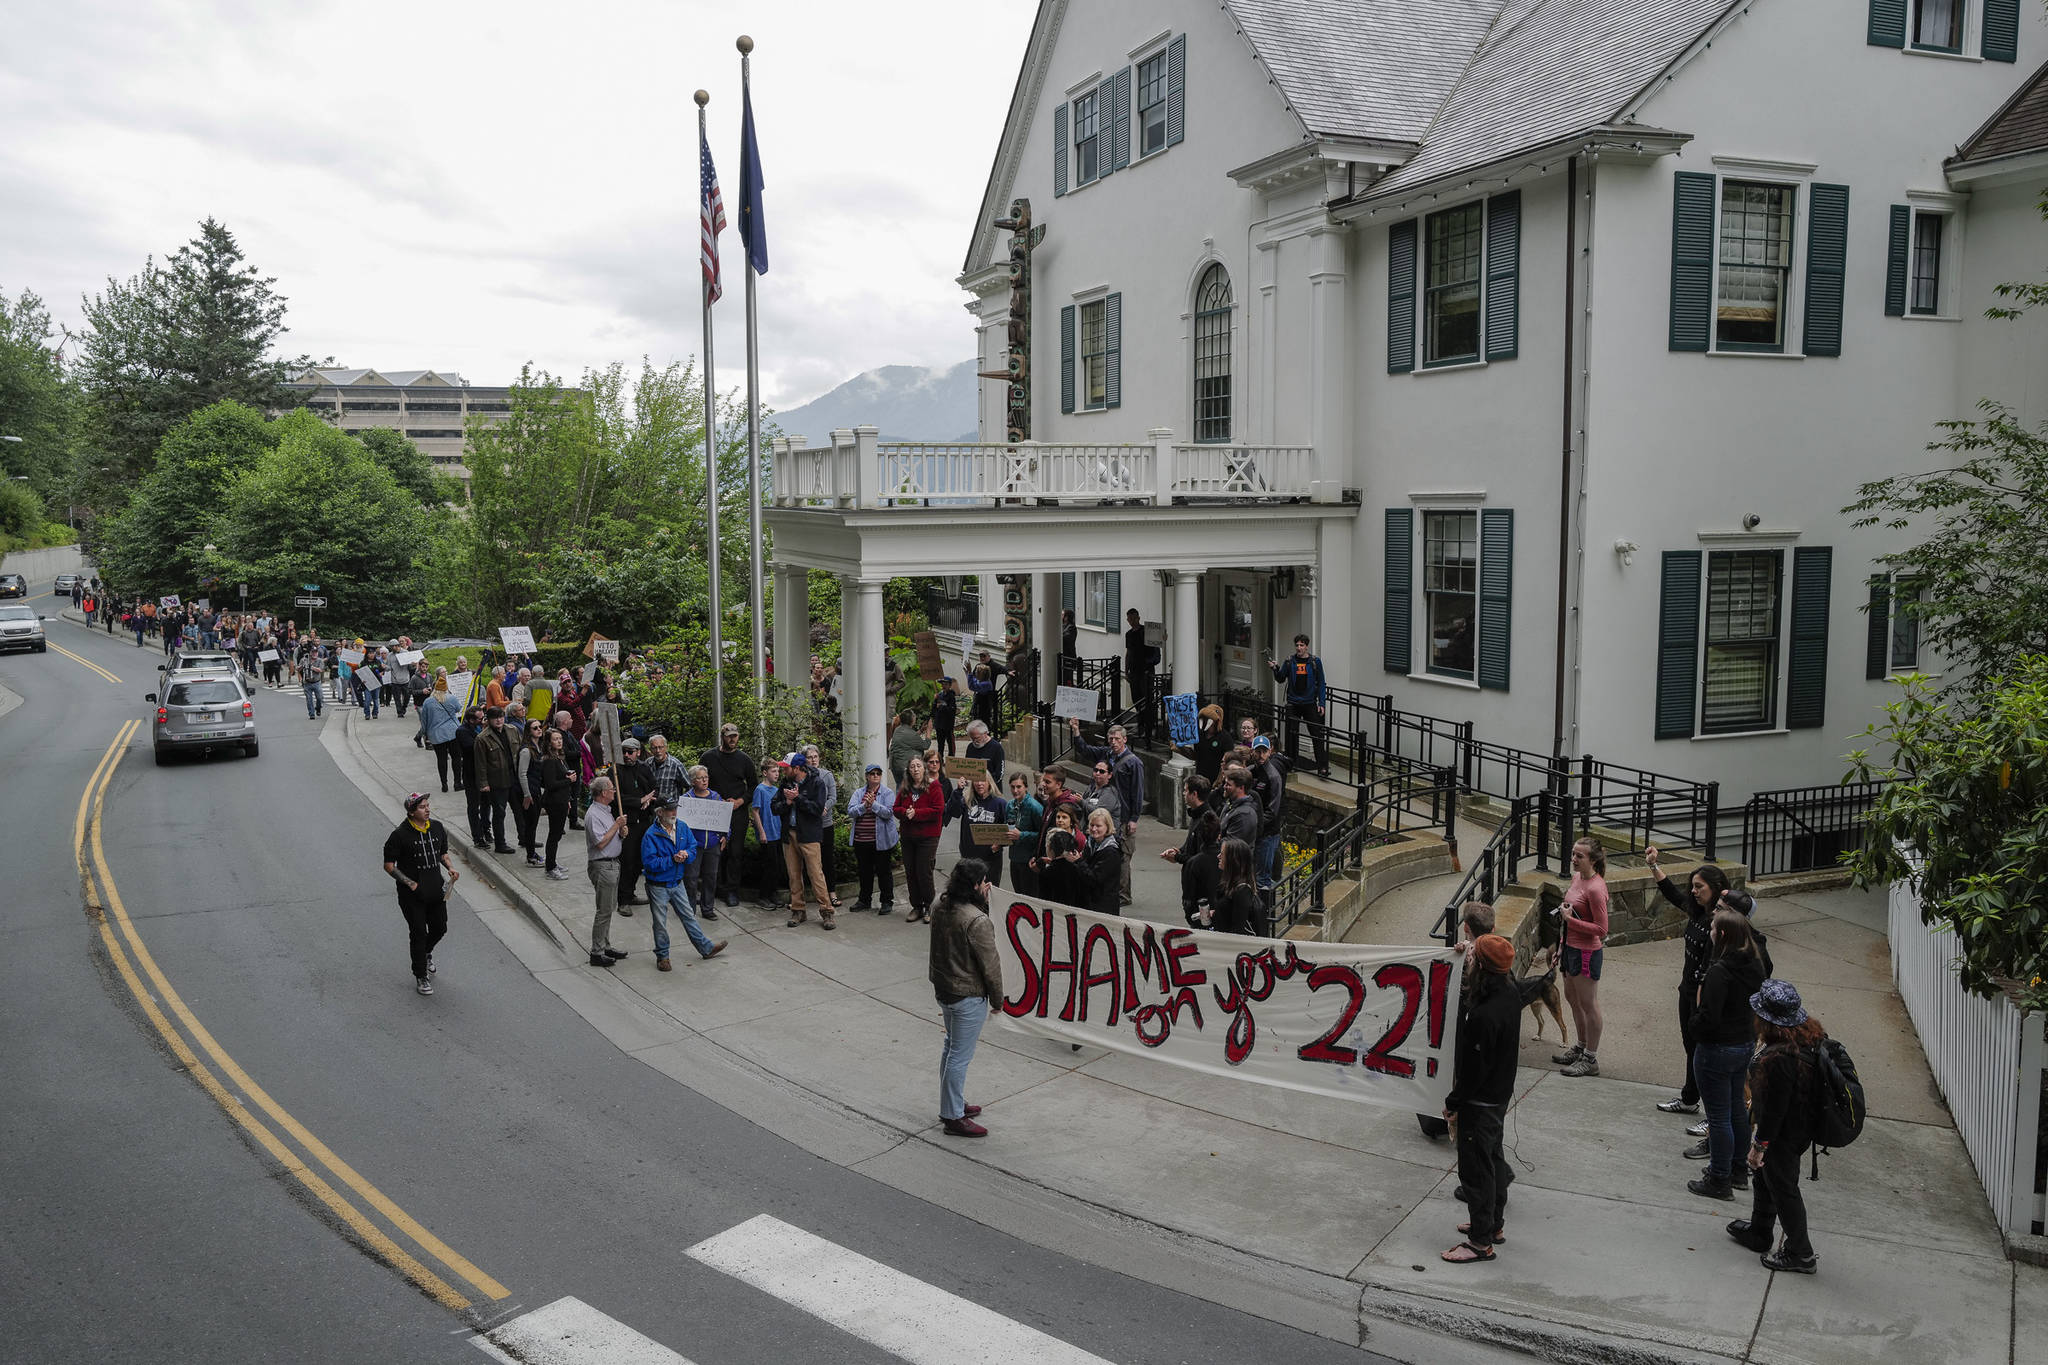 ‘Shame on you, 22’: Protesters march to Governor’s Mansion